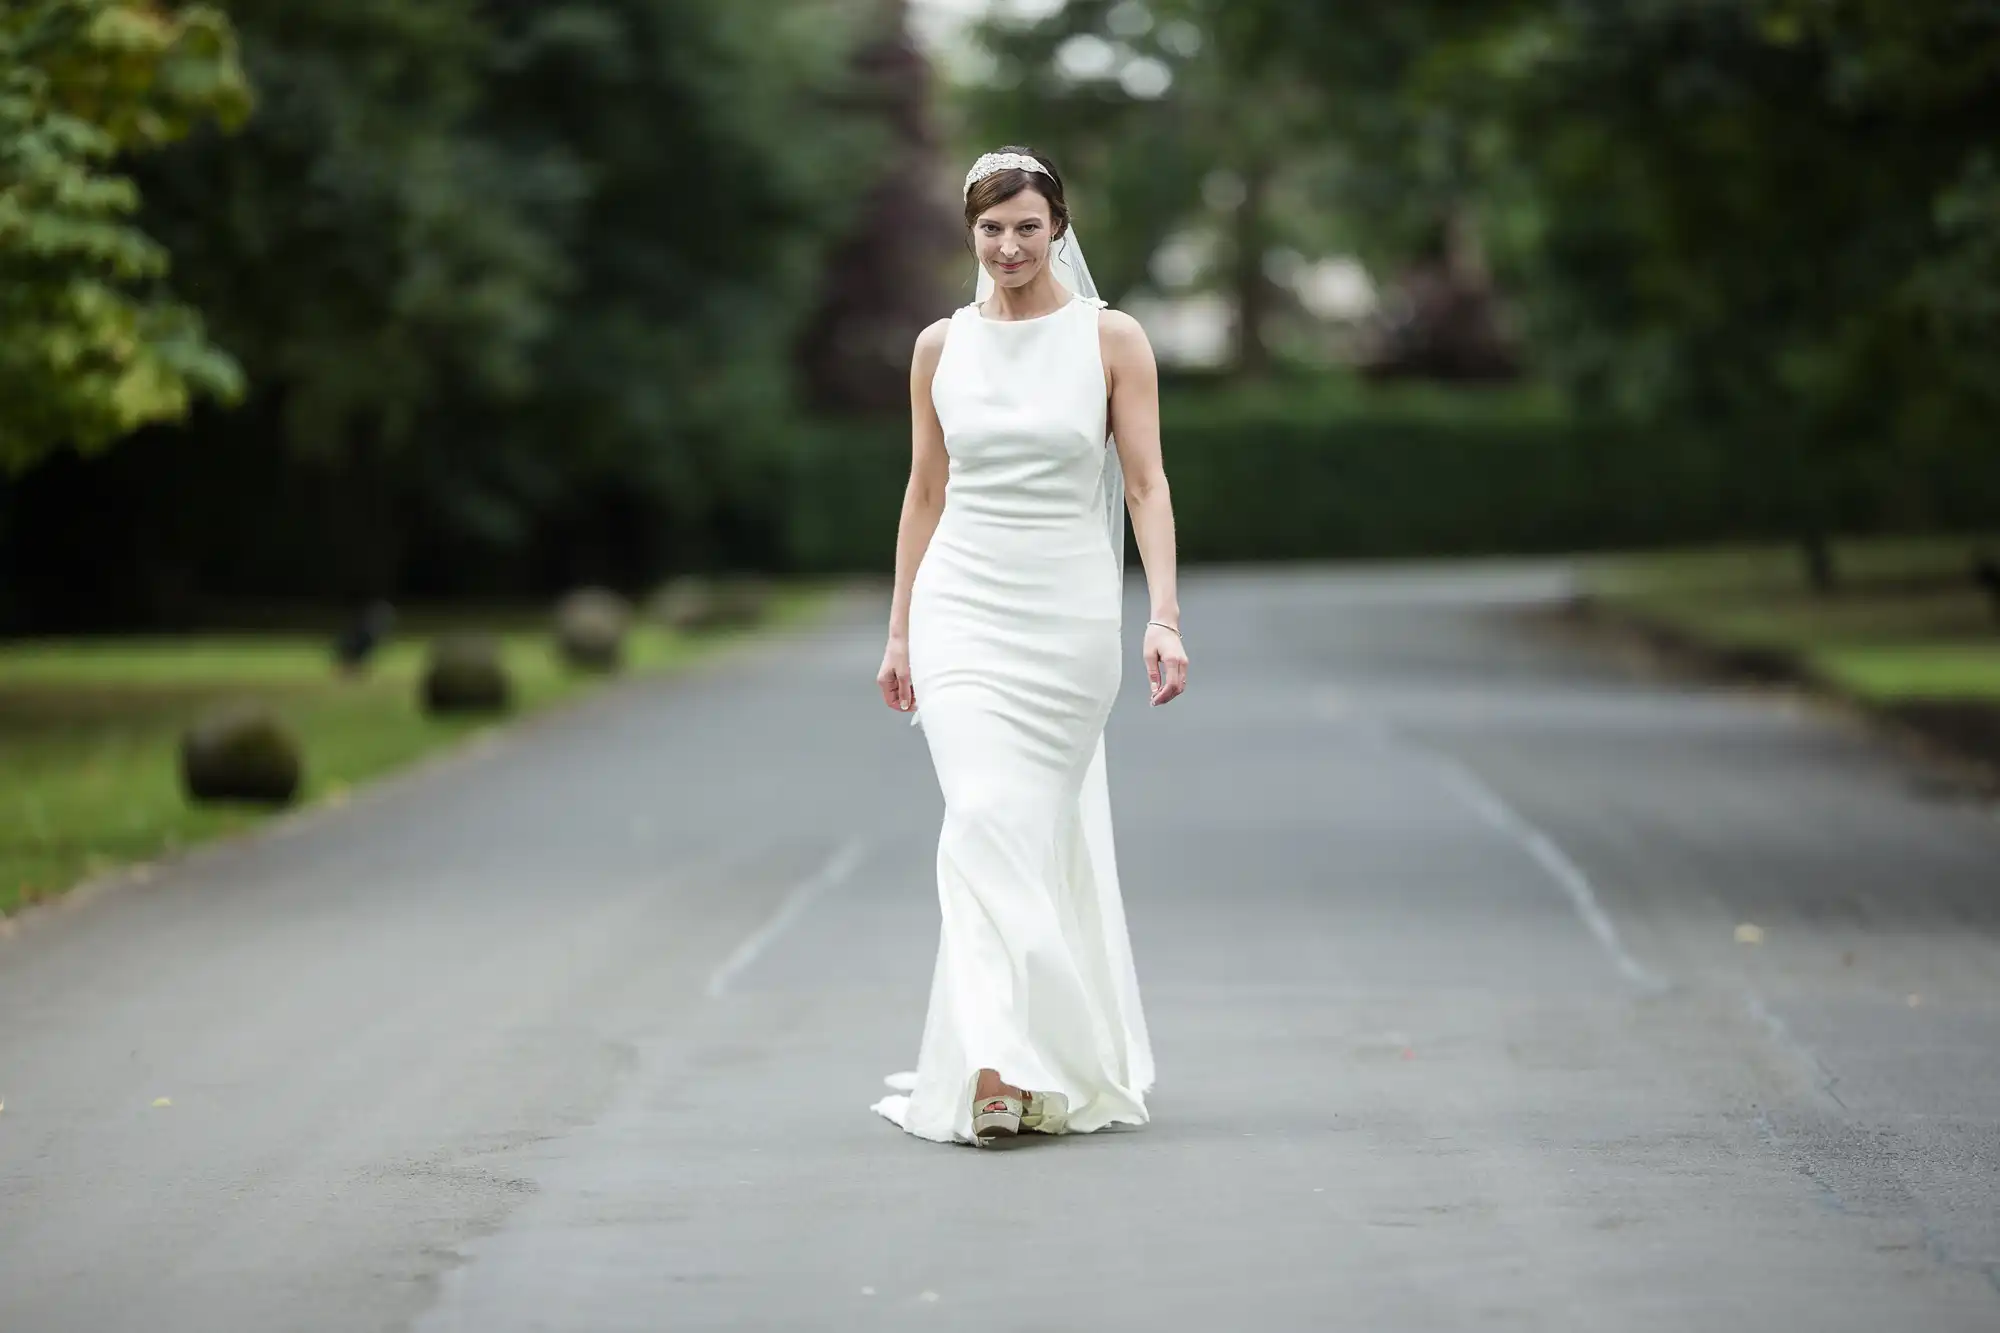 A bride in a sleeveless white dress is walking down a paved path surrounded by greenery.